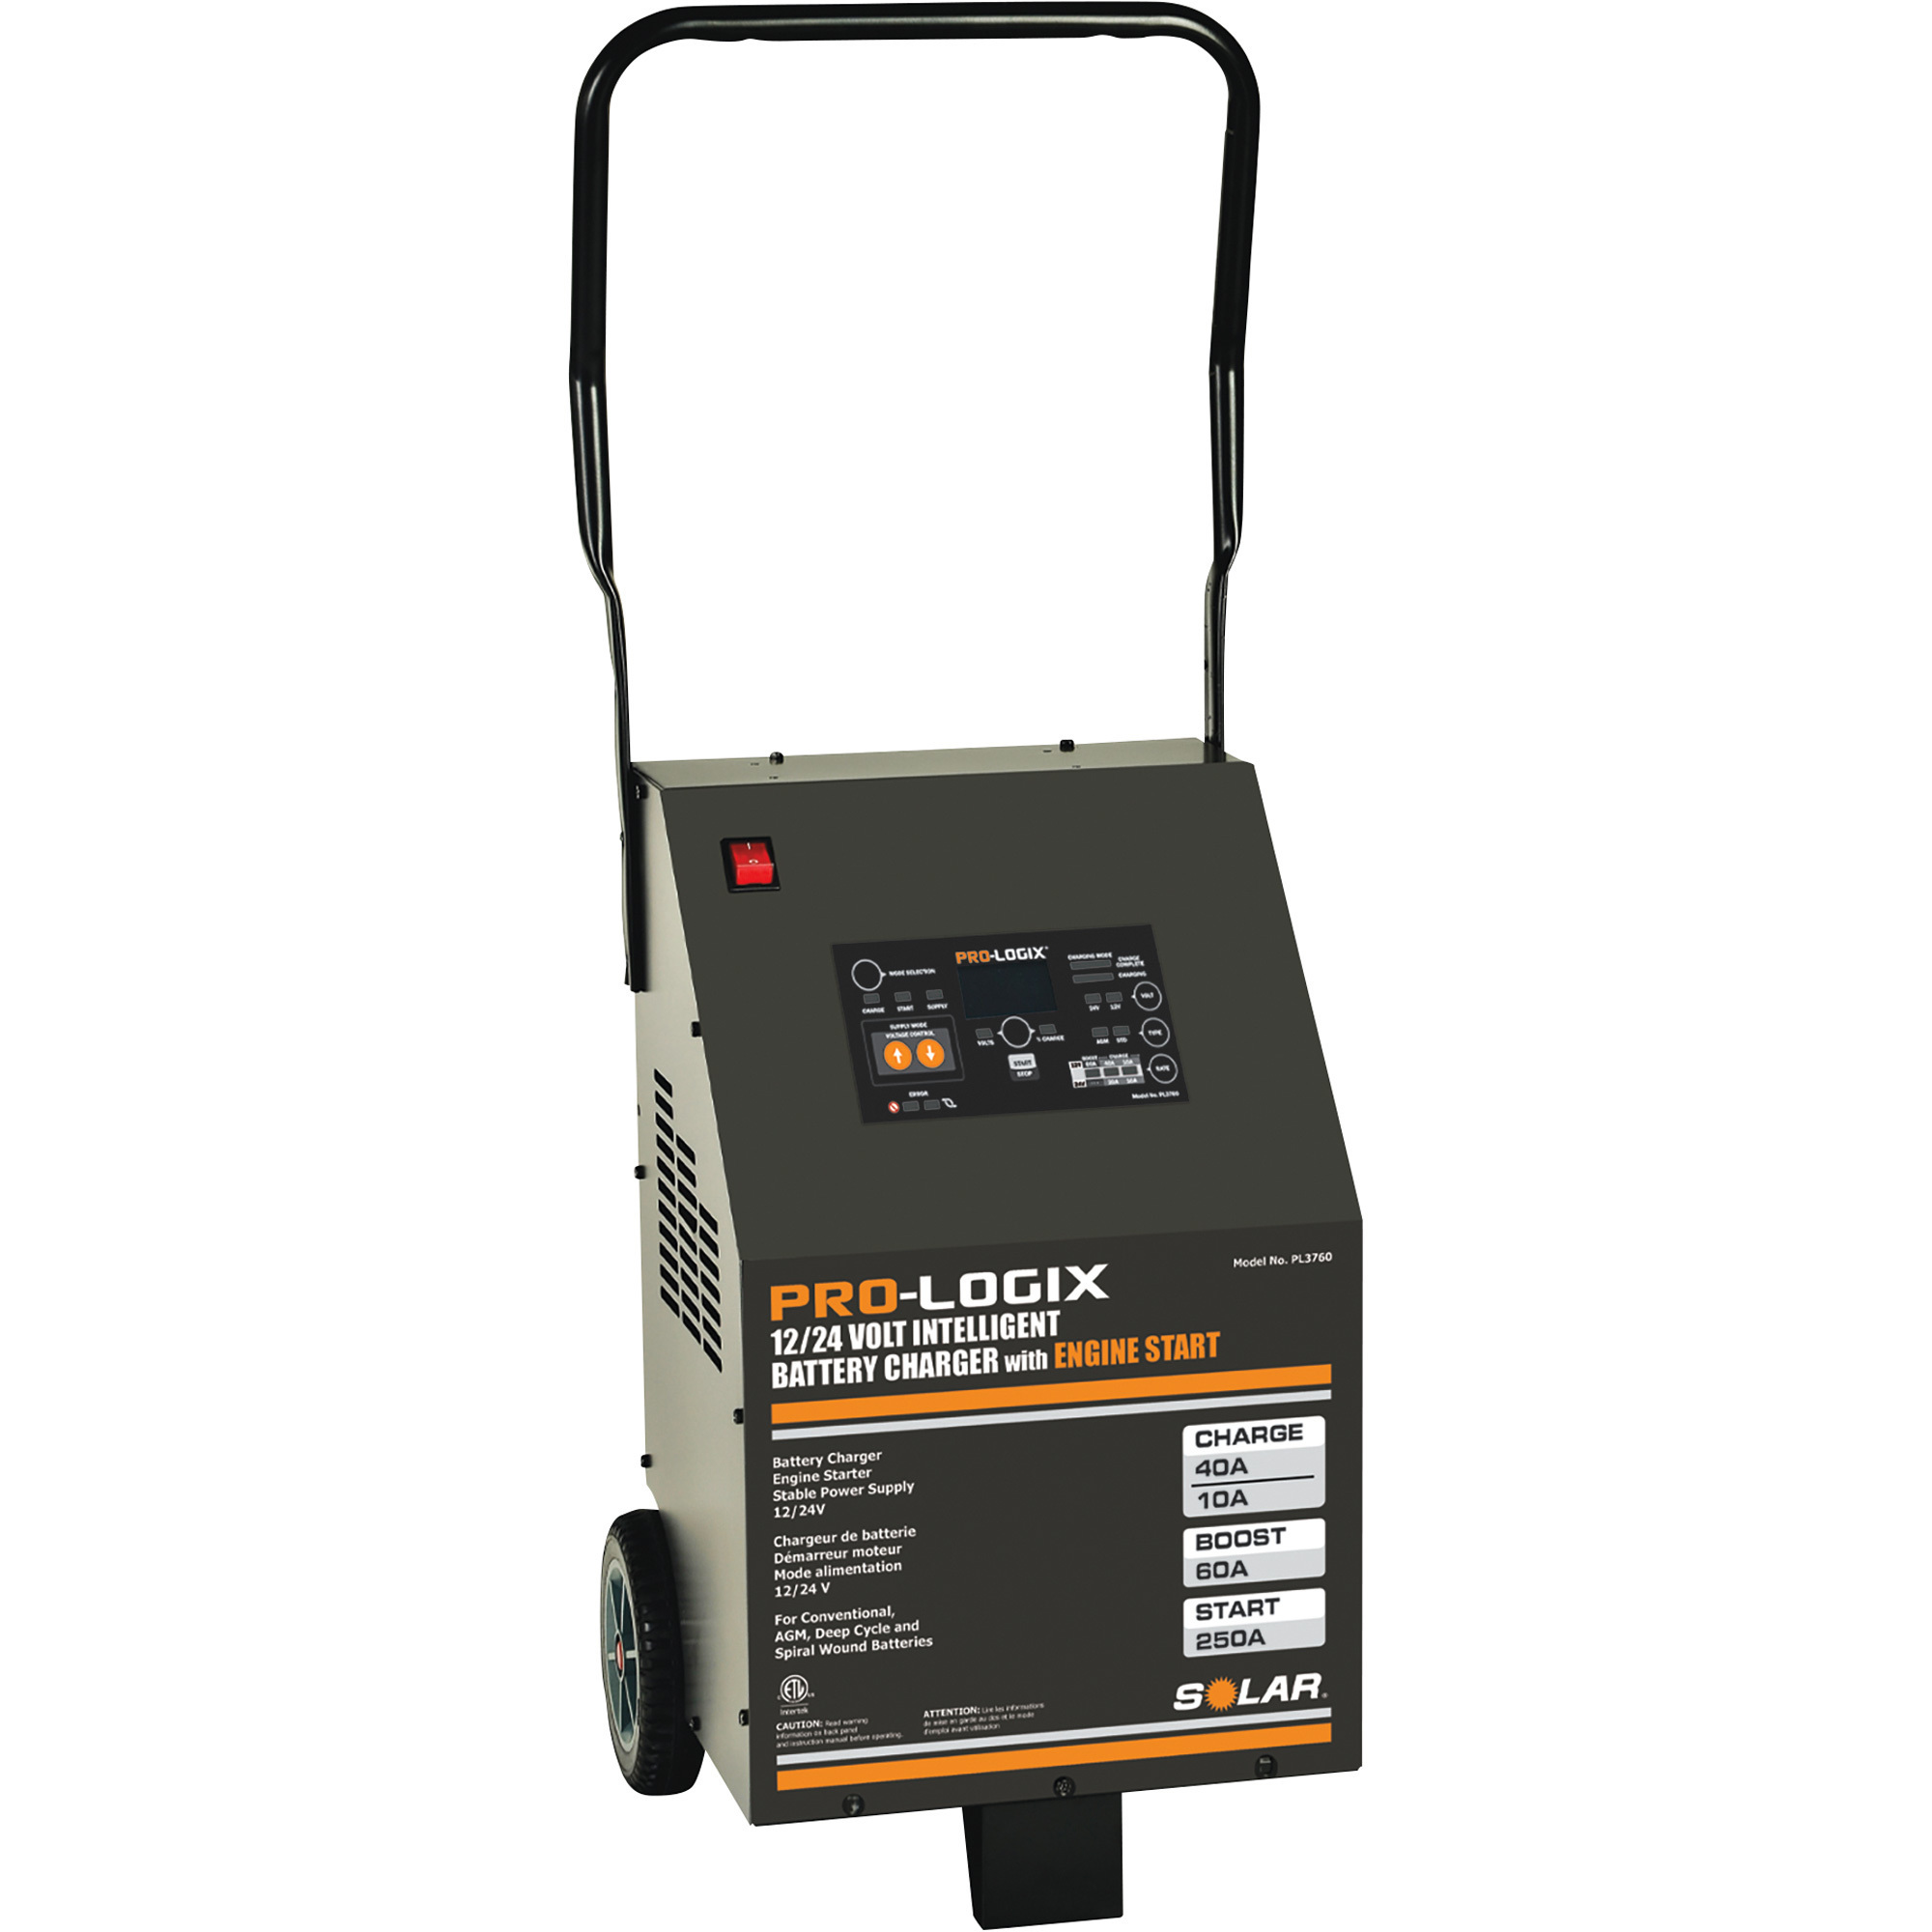 Pro-Logix Intelligent Wheeled Battery Charger with Engine Start, 12/24  Volts, 60/40/10/250 Amps, Model# PL3760